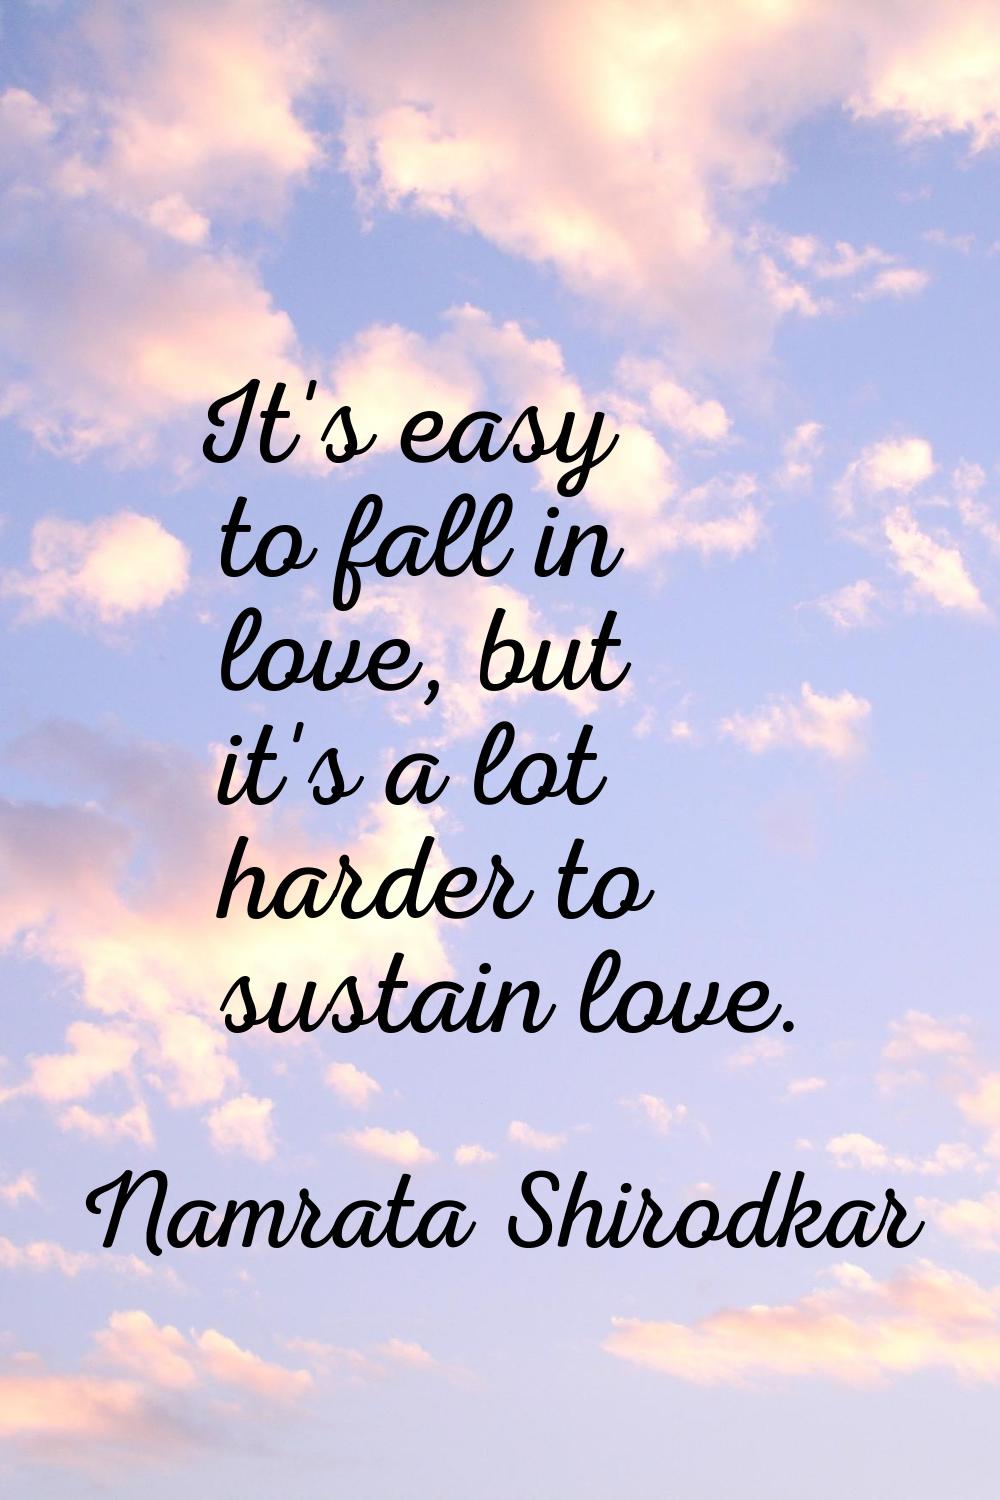 It's easy to fall in love, but it's a lot harder to sustain love.